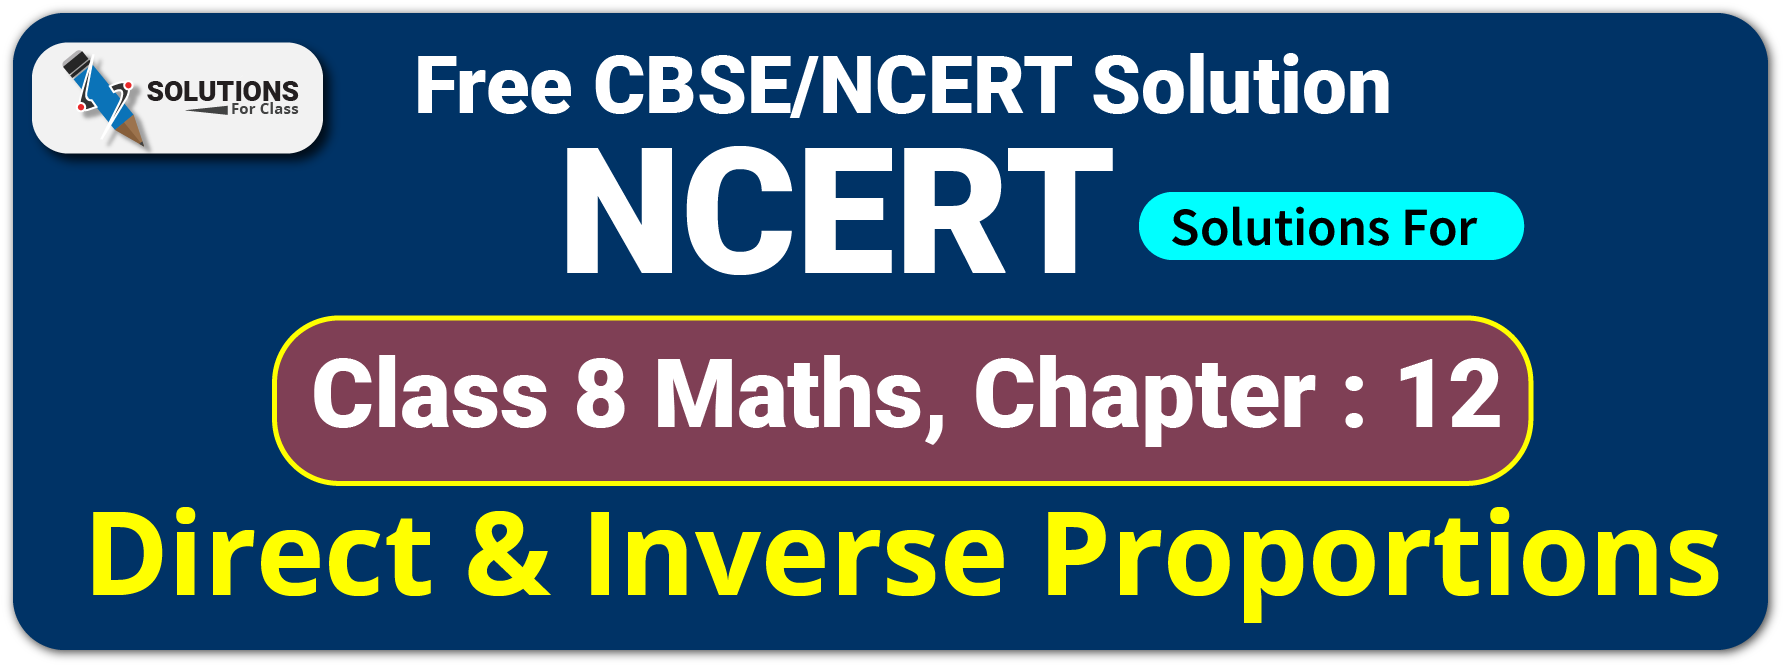 NCERT Solutions For Class 8 Chapter 13, Direct and Inverse Proportions